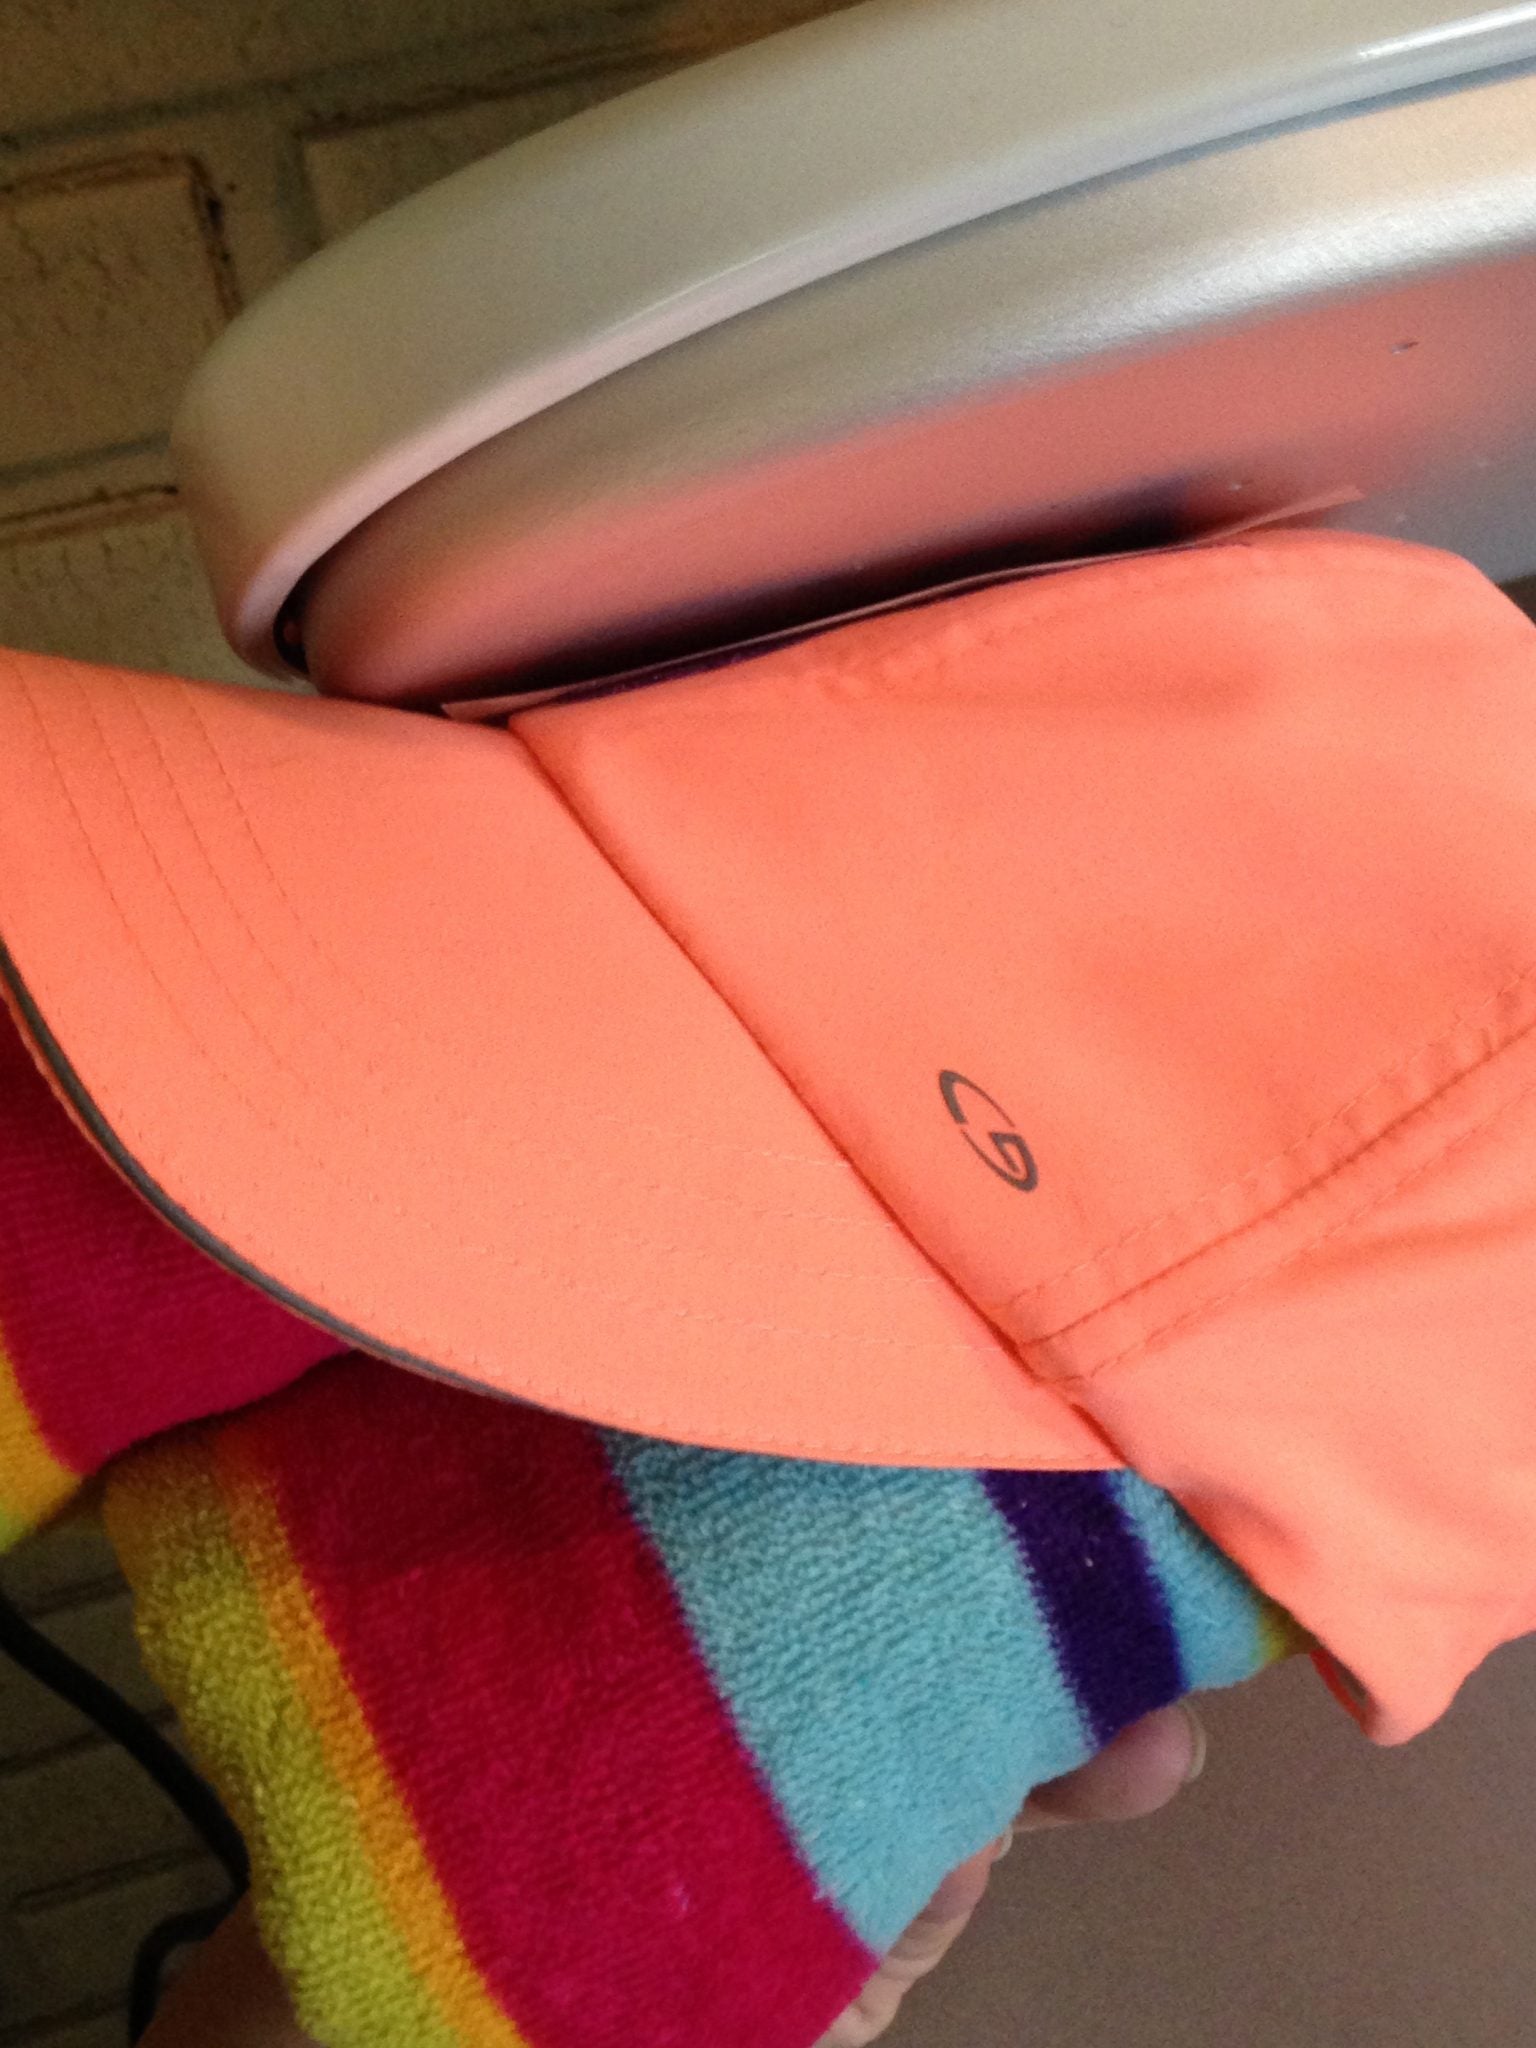 How to heat press a hat without anything special.